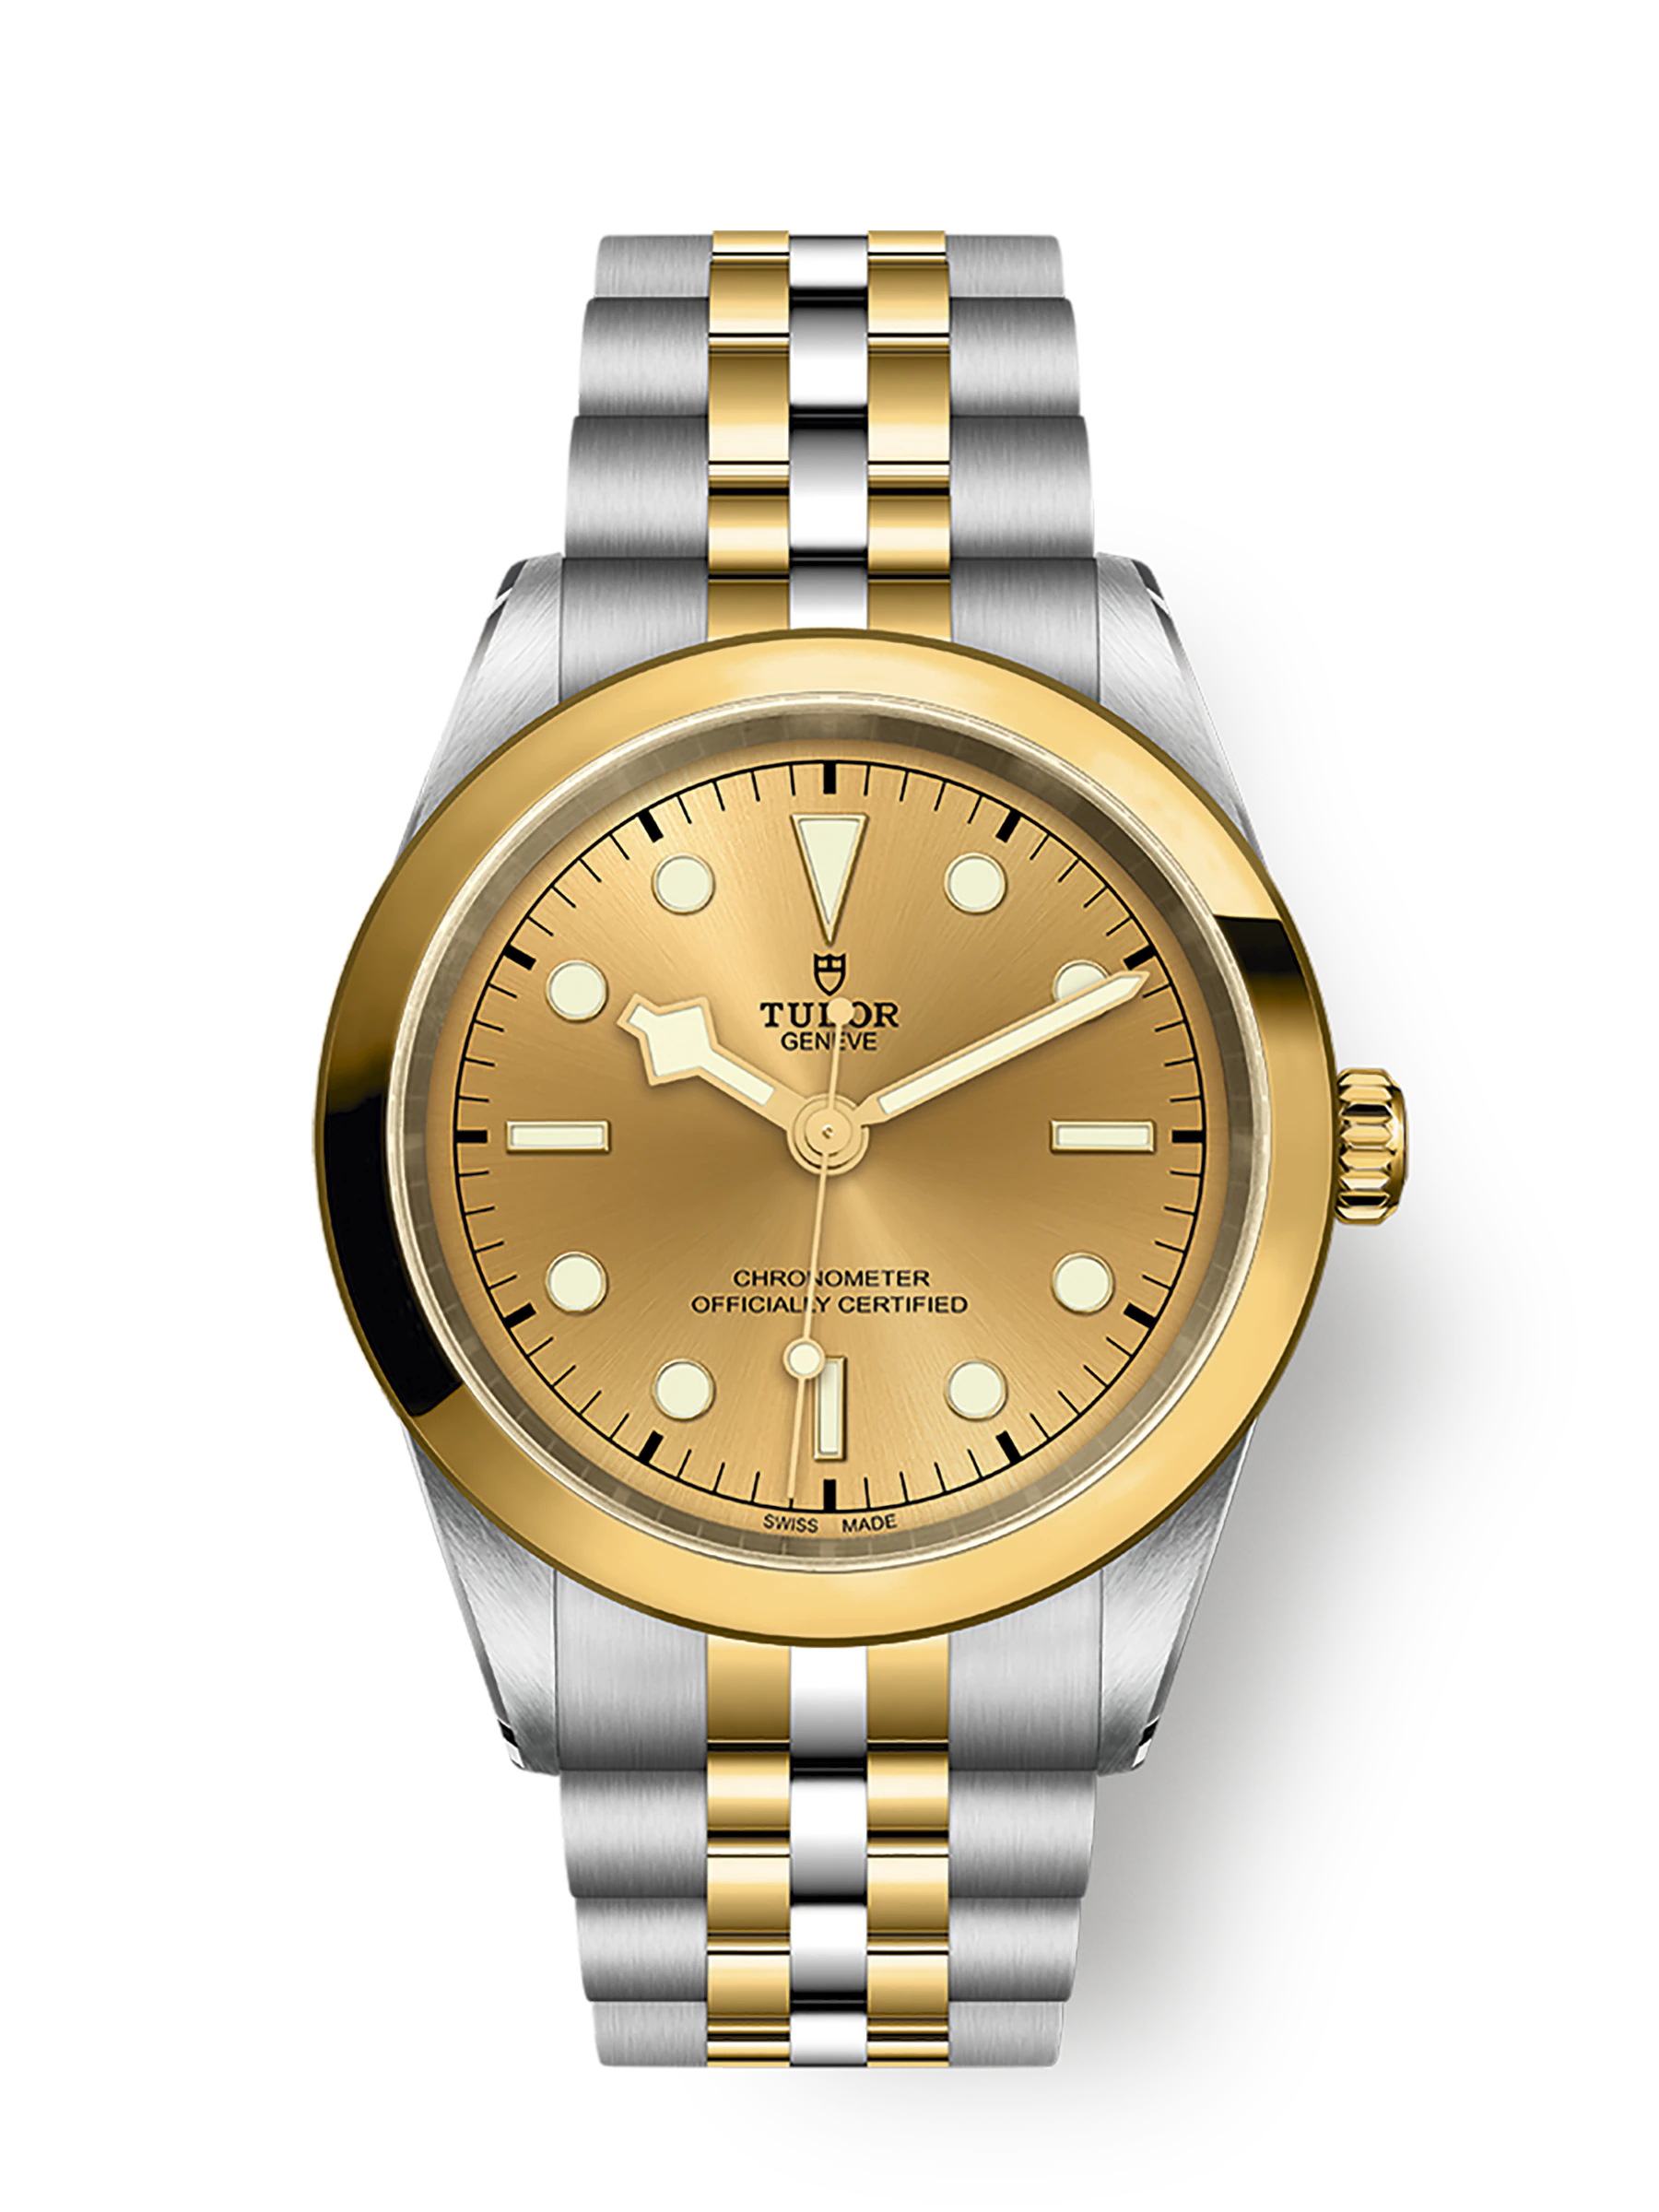 Tudor Black Bay 41 S&G, 316L Stainless Steel and 18k Yellow Gold, Ref# M79683-0005